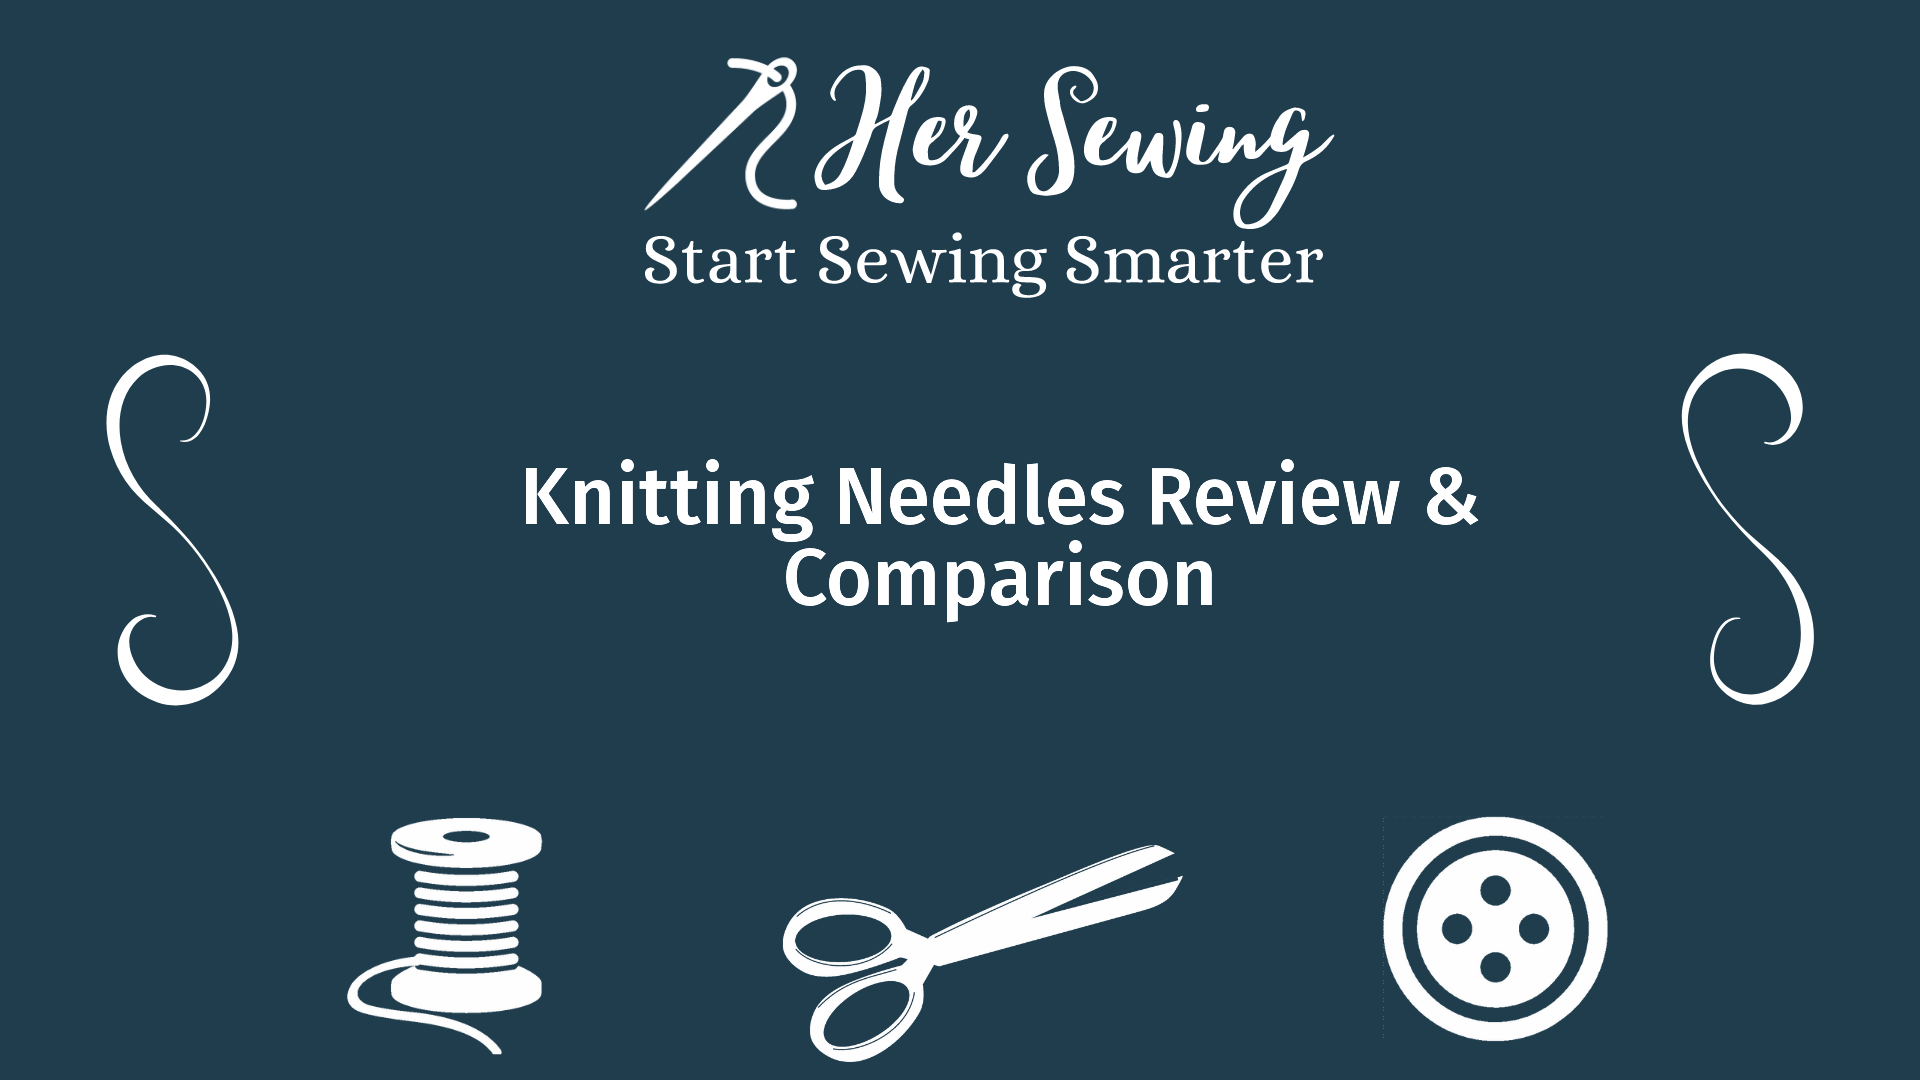 Knitting Needles Review & Comparison